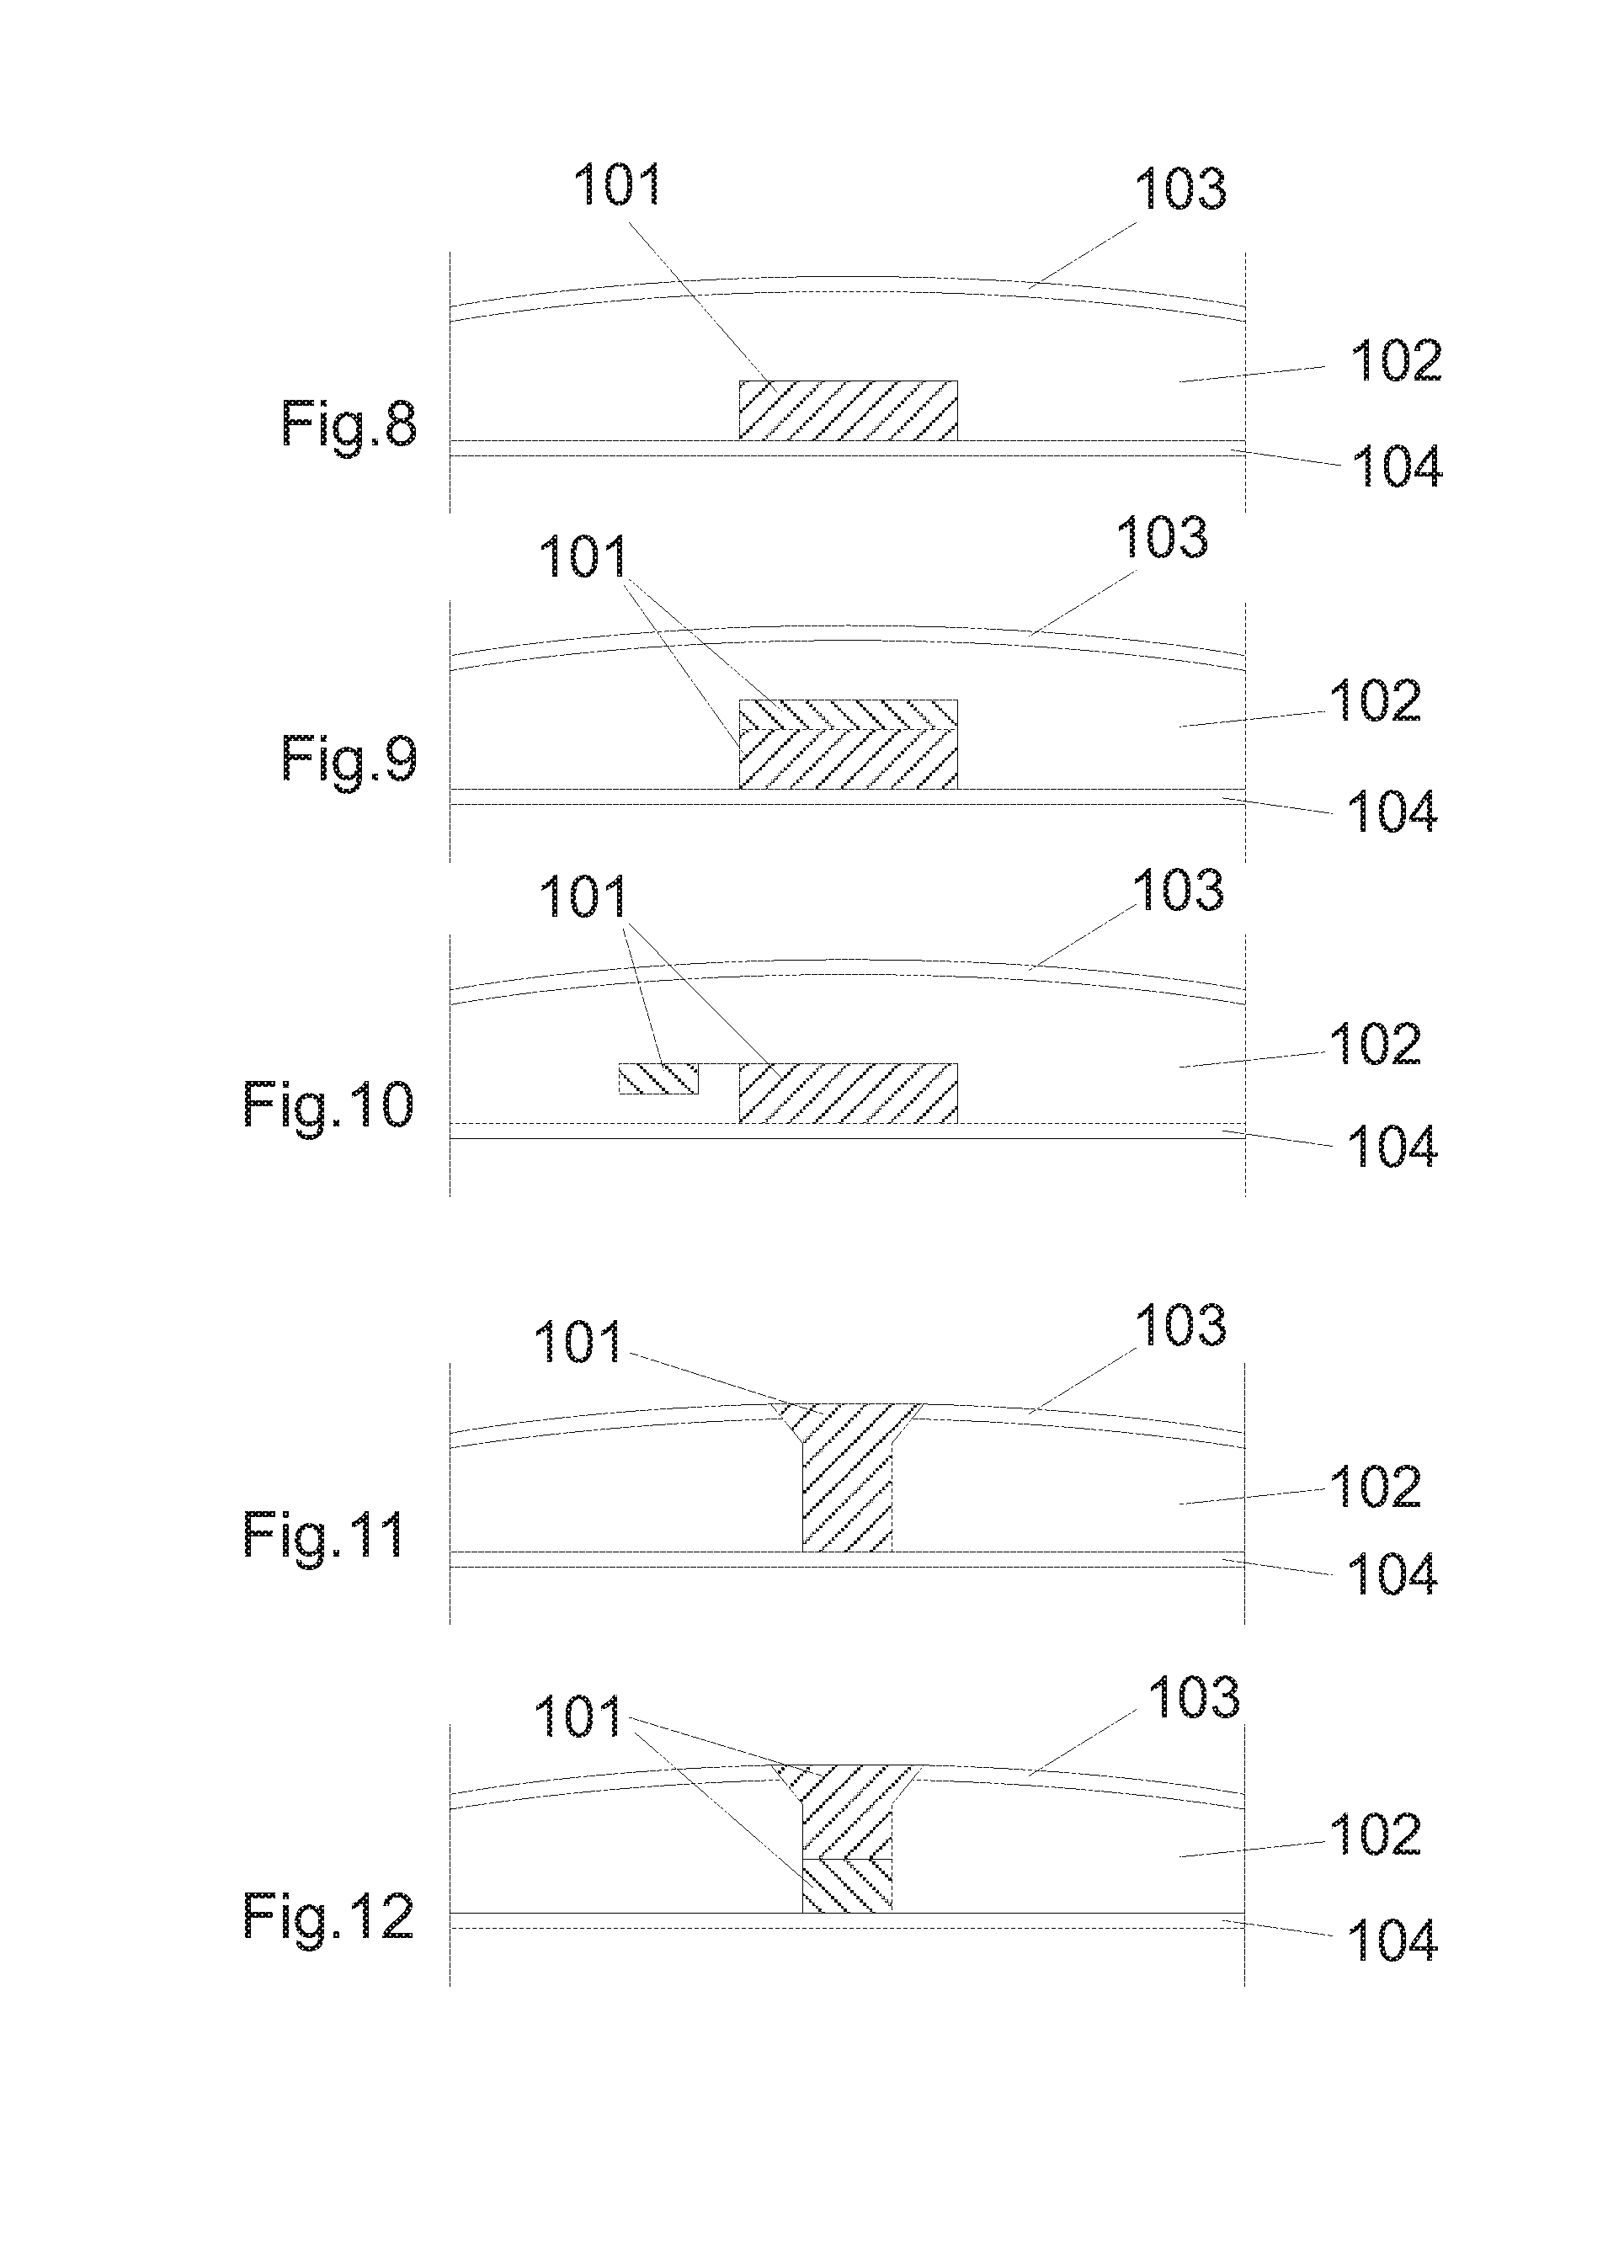 Three-Dimensional Adhesive Device Having a Microelectronic System Embedded Therein